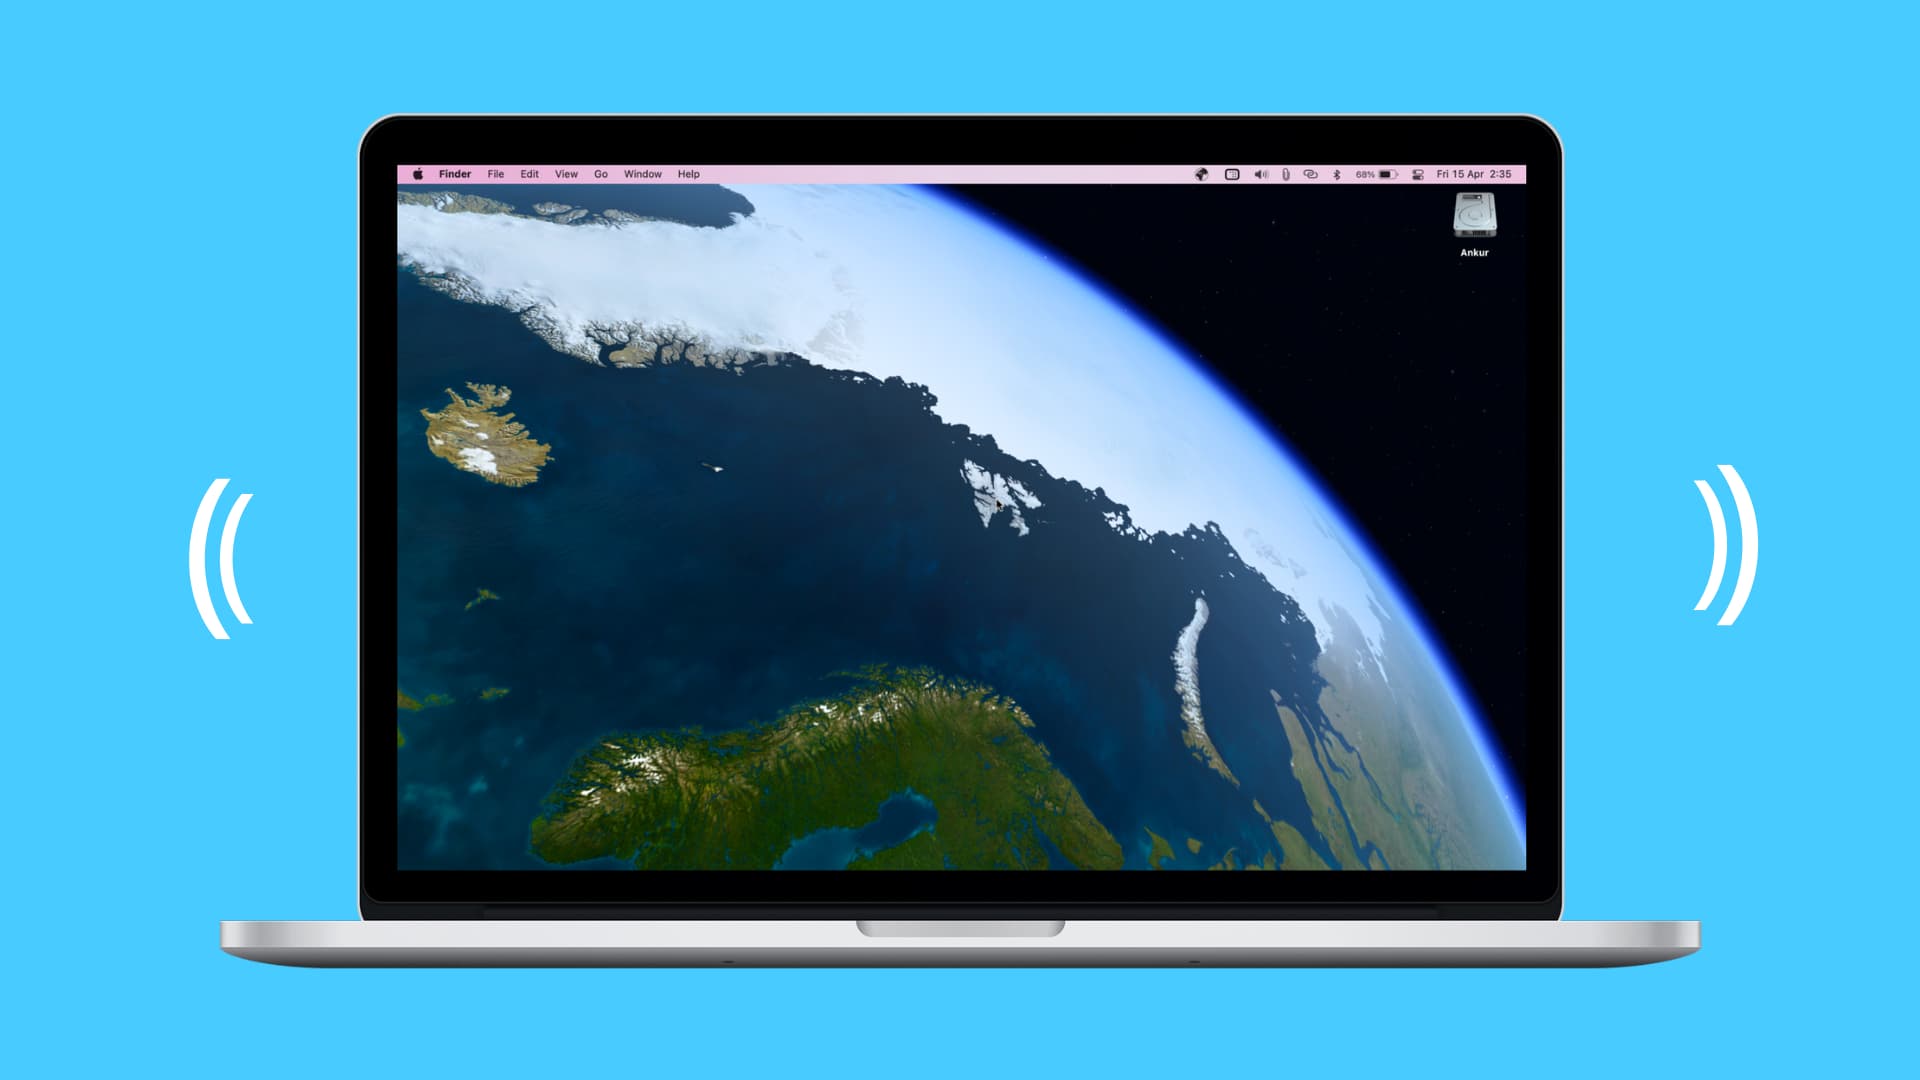 Best animated screen savers for Mac